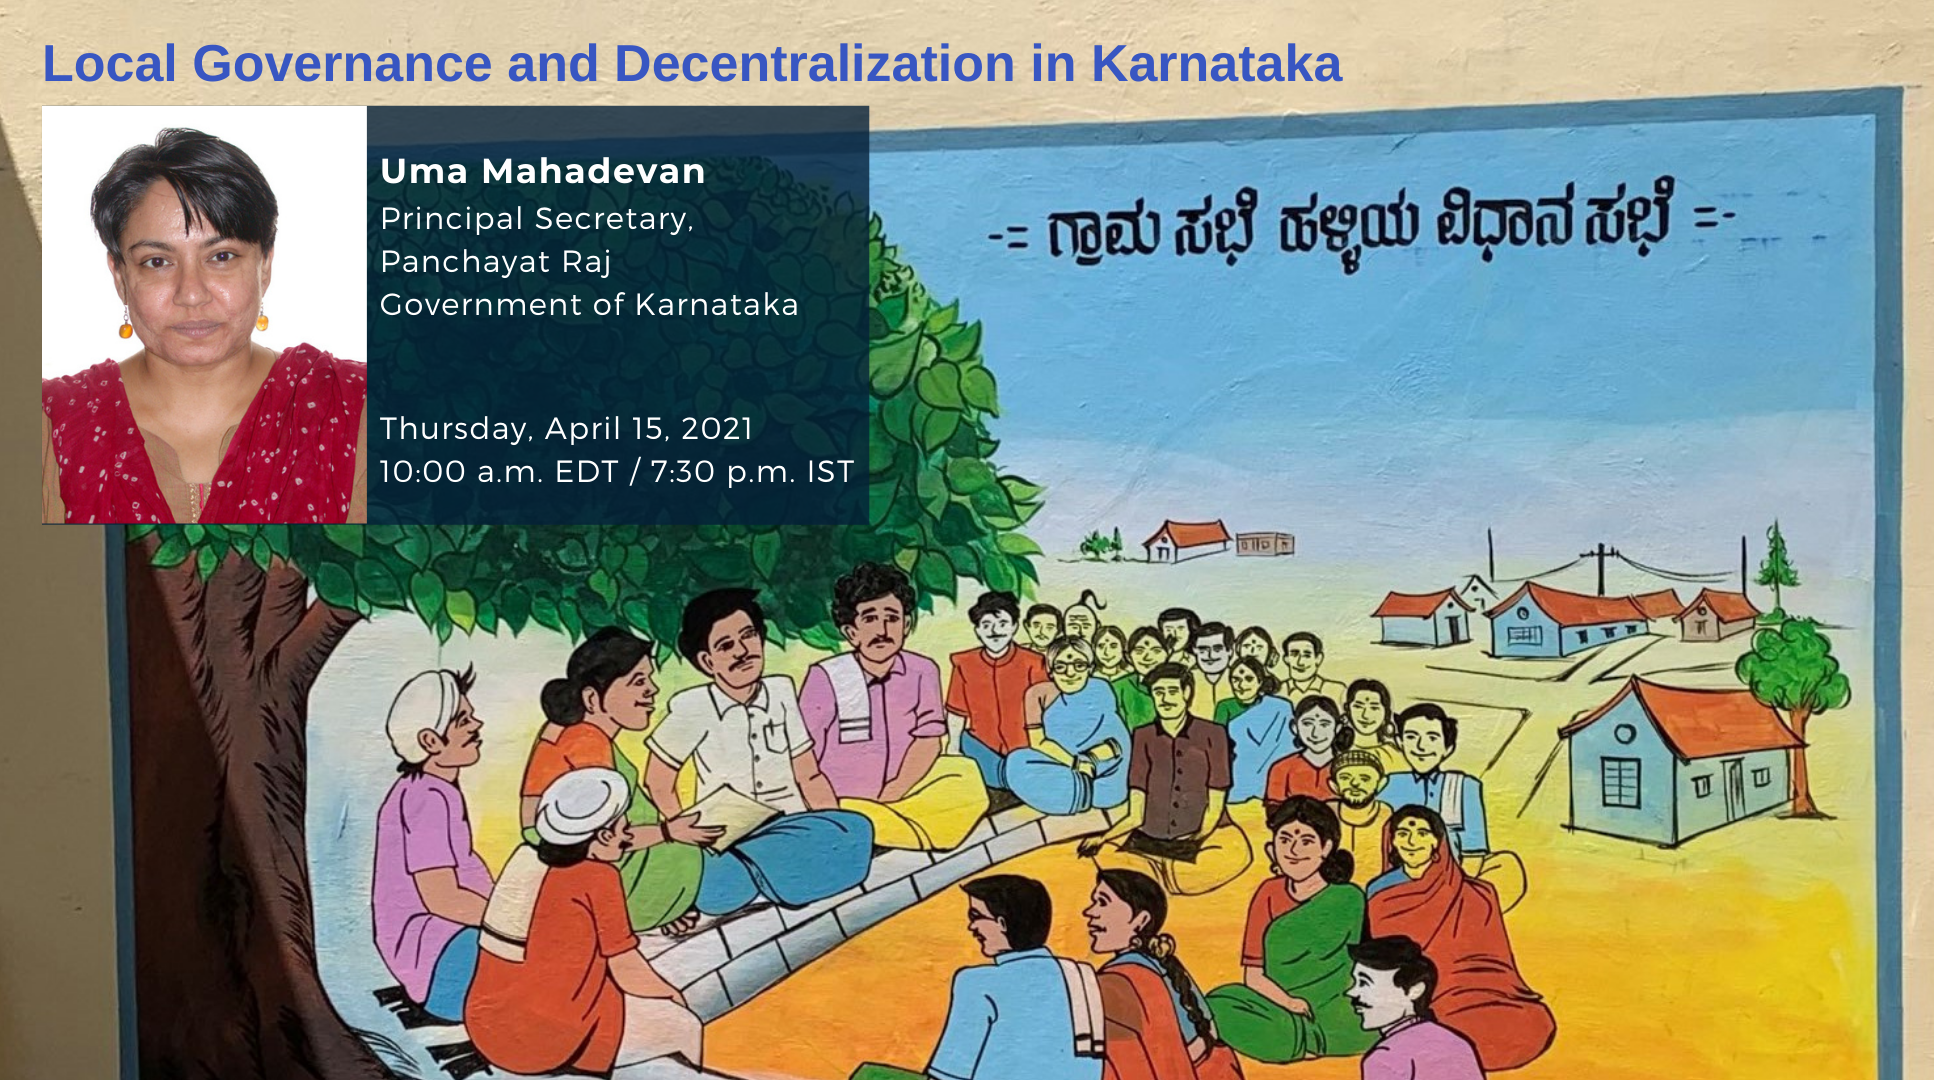 Local Governance and Decentralization in Karnataka Center for the Advanced Study of India (CASI)